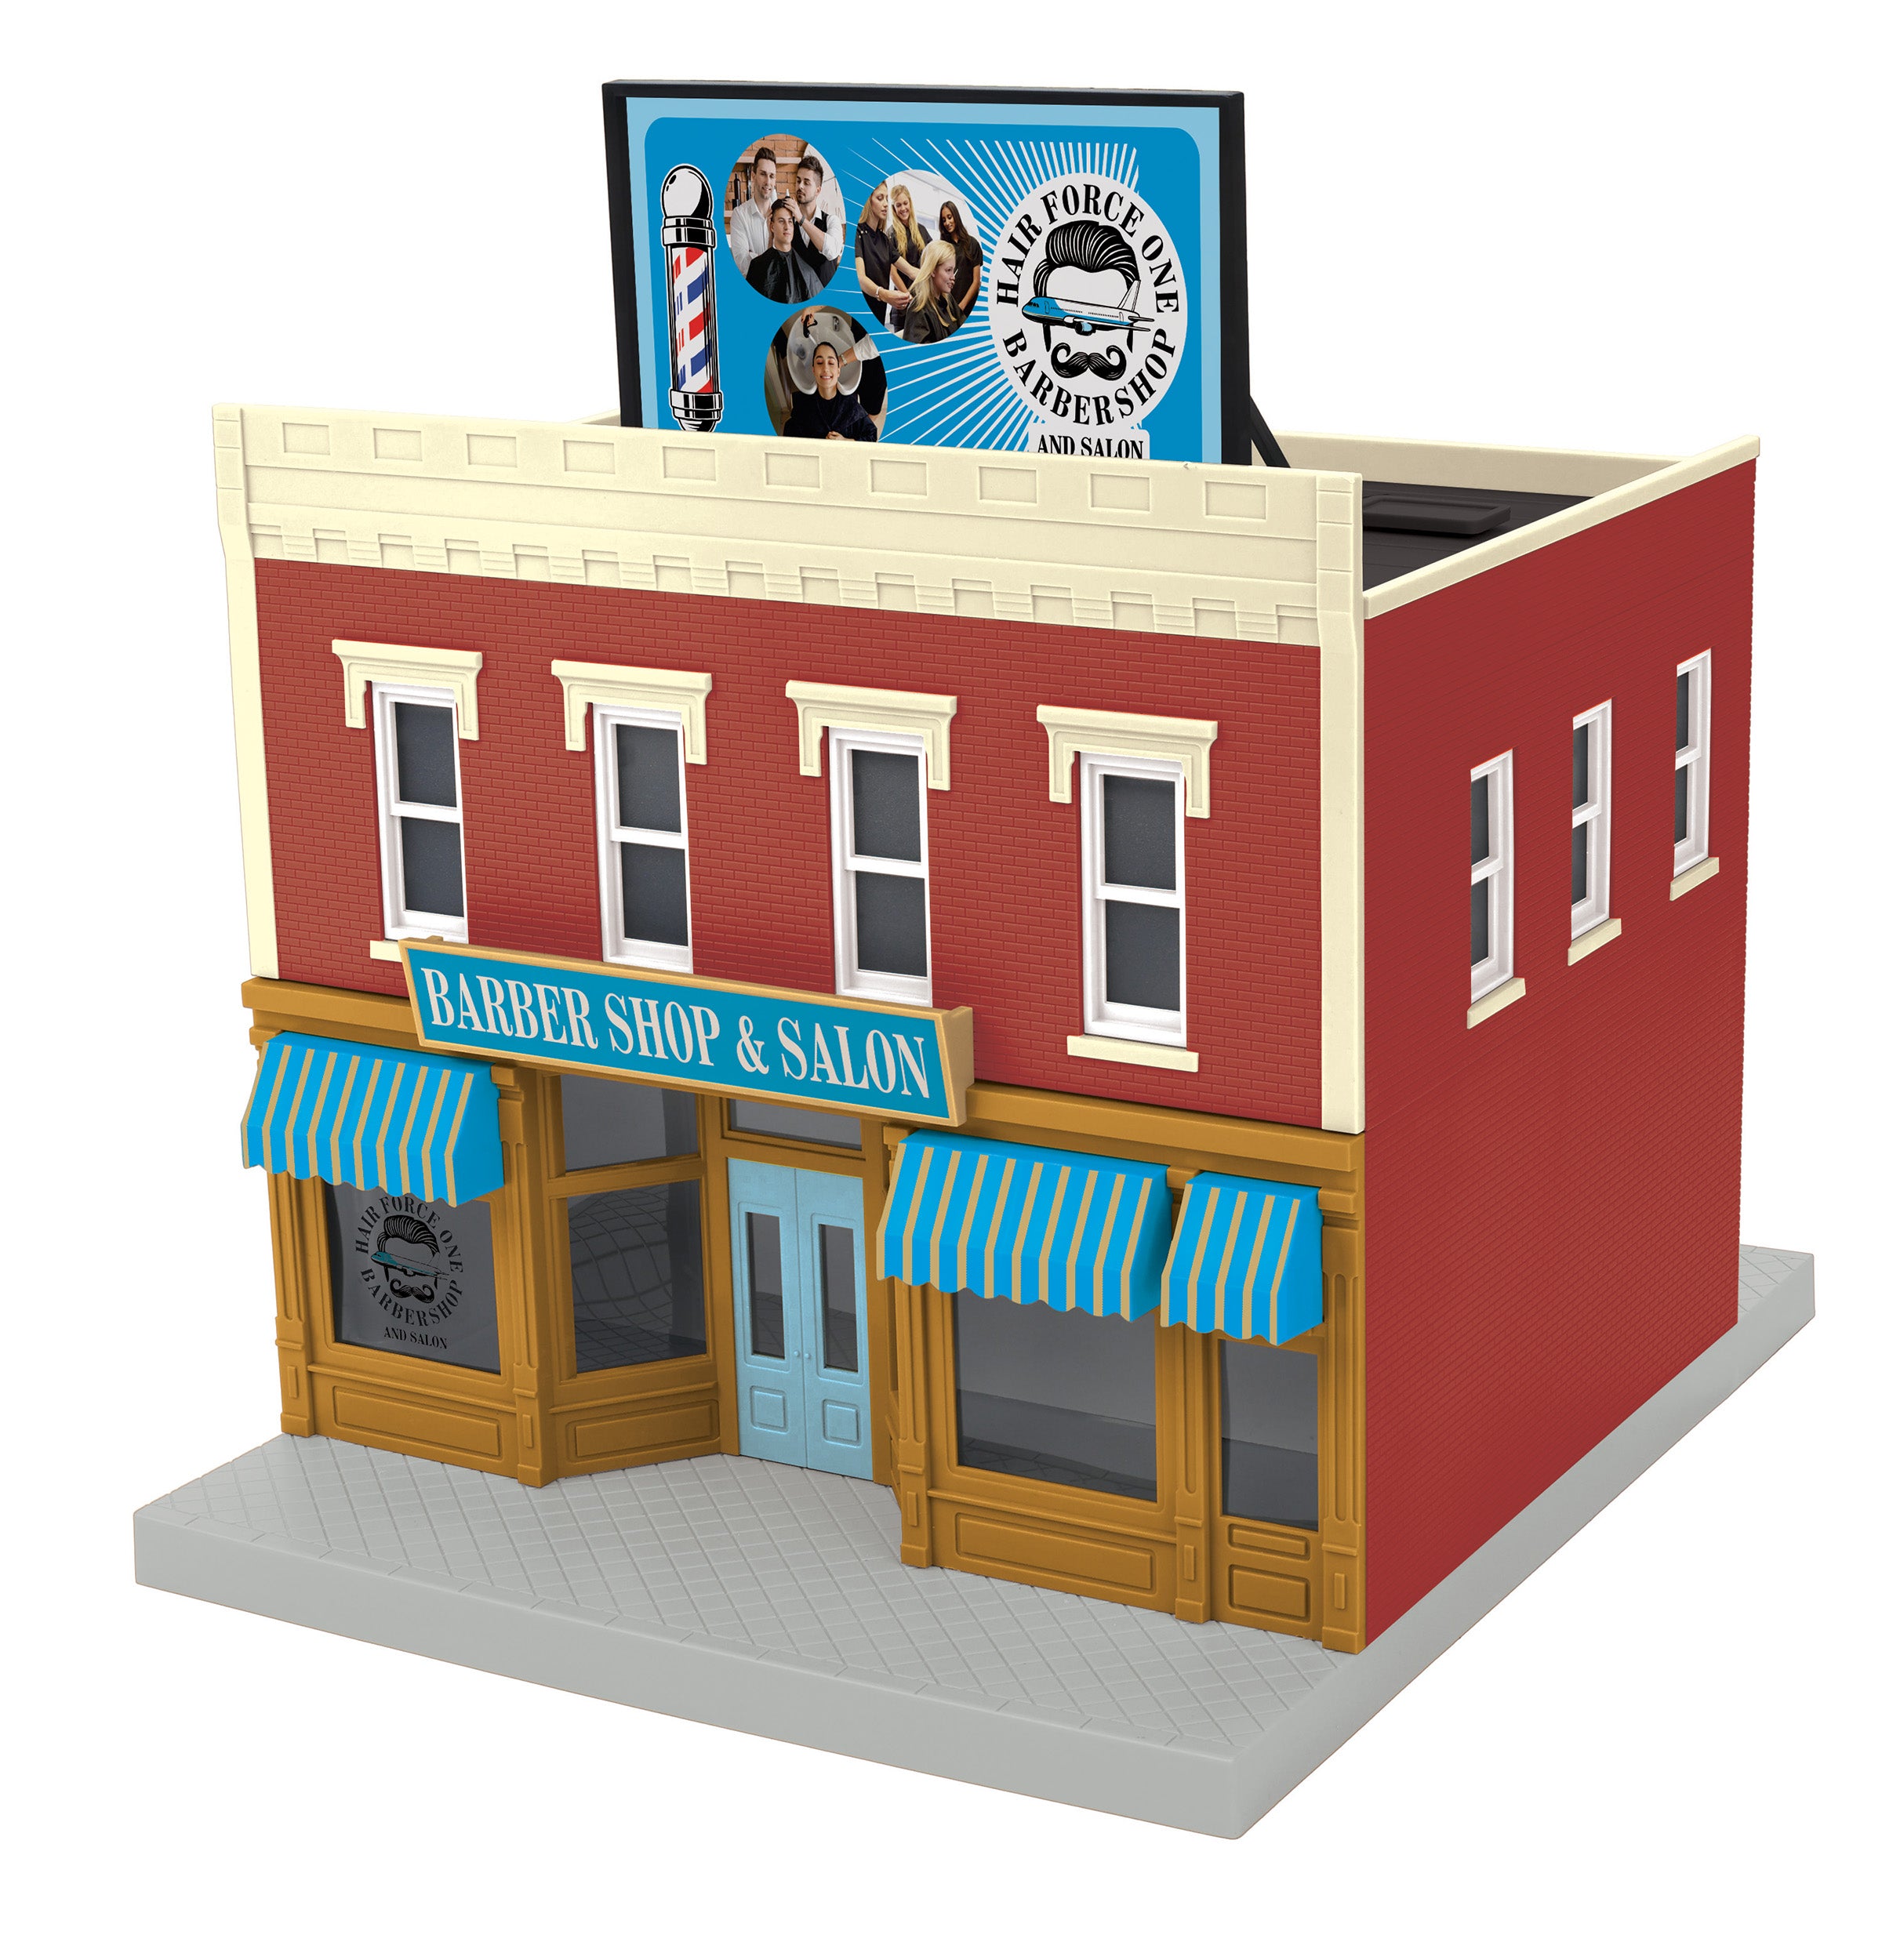 MTH 30-90686 - 2-Story City Building 1 "Hair Force One Barber Shop & Salon" w/ LEDs